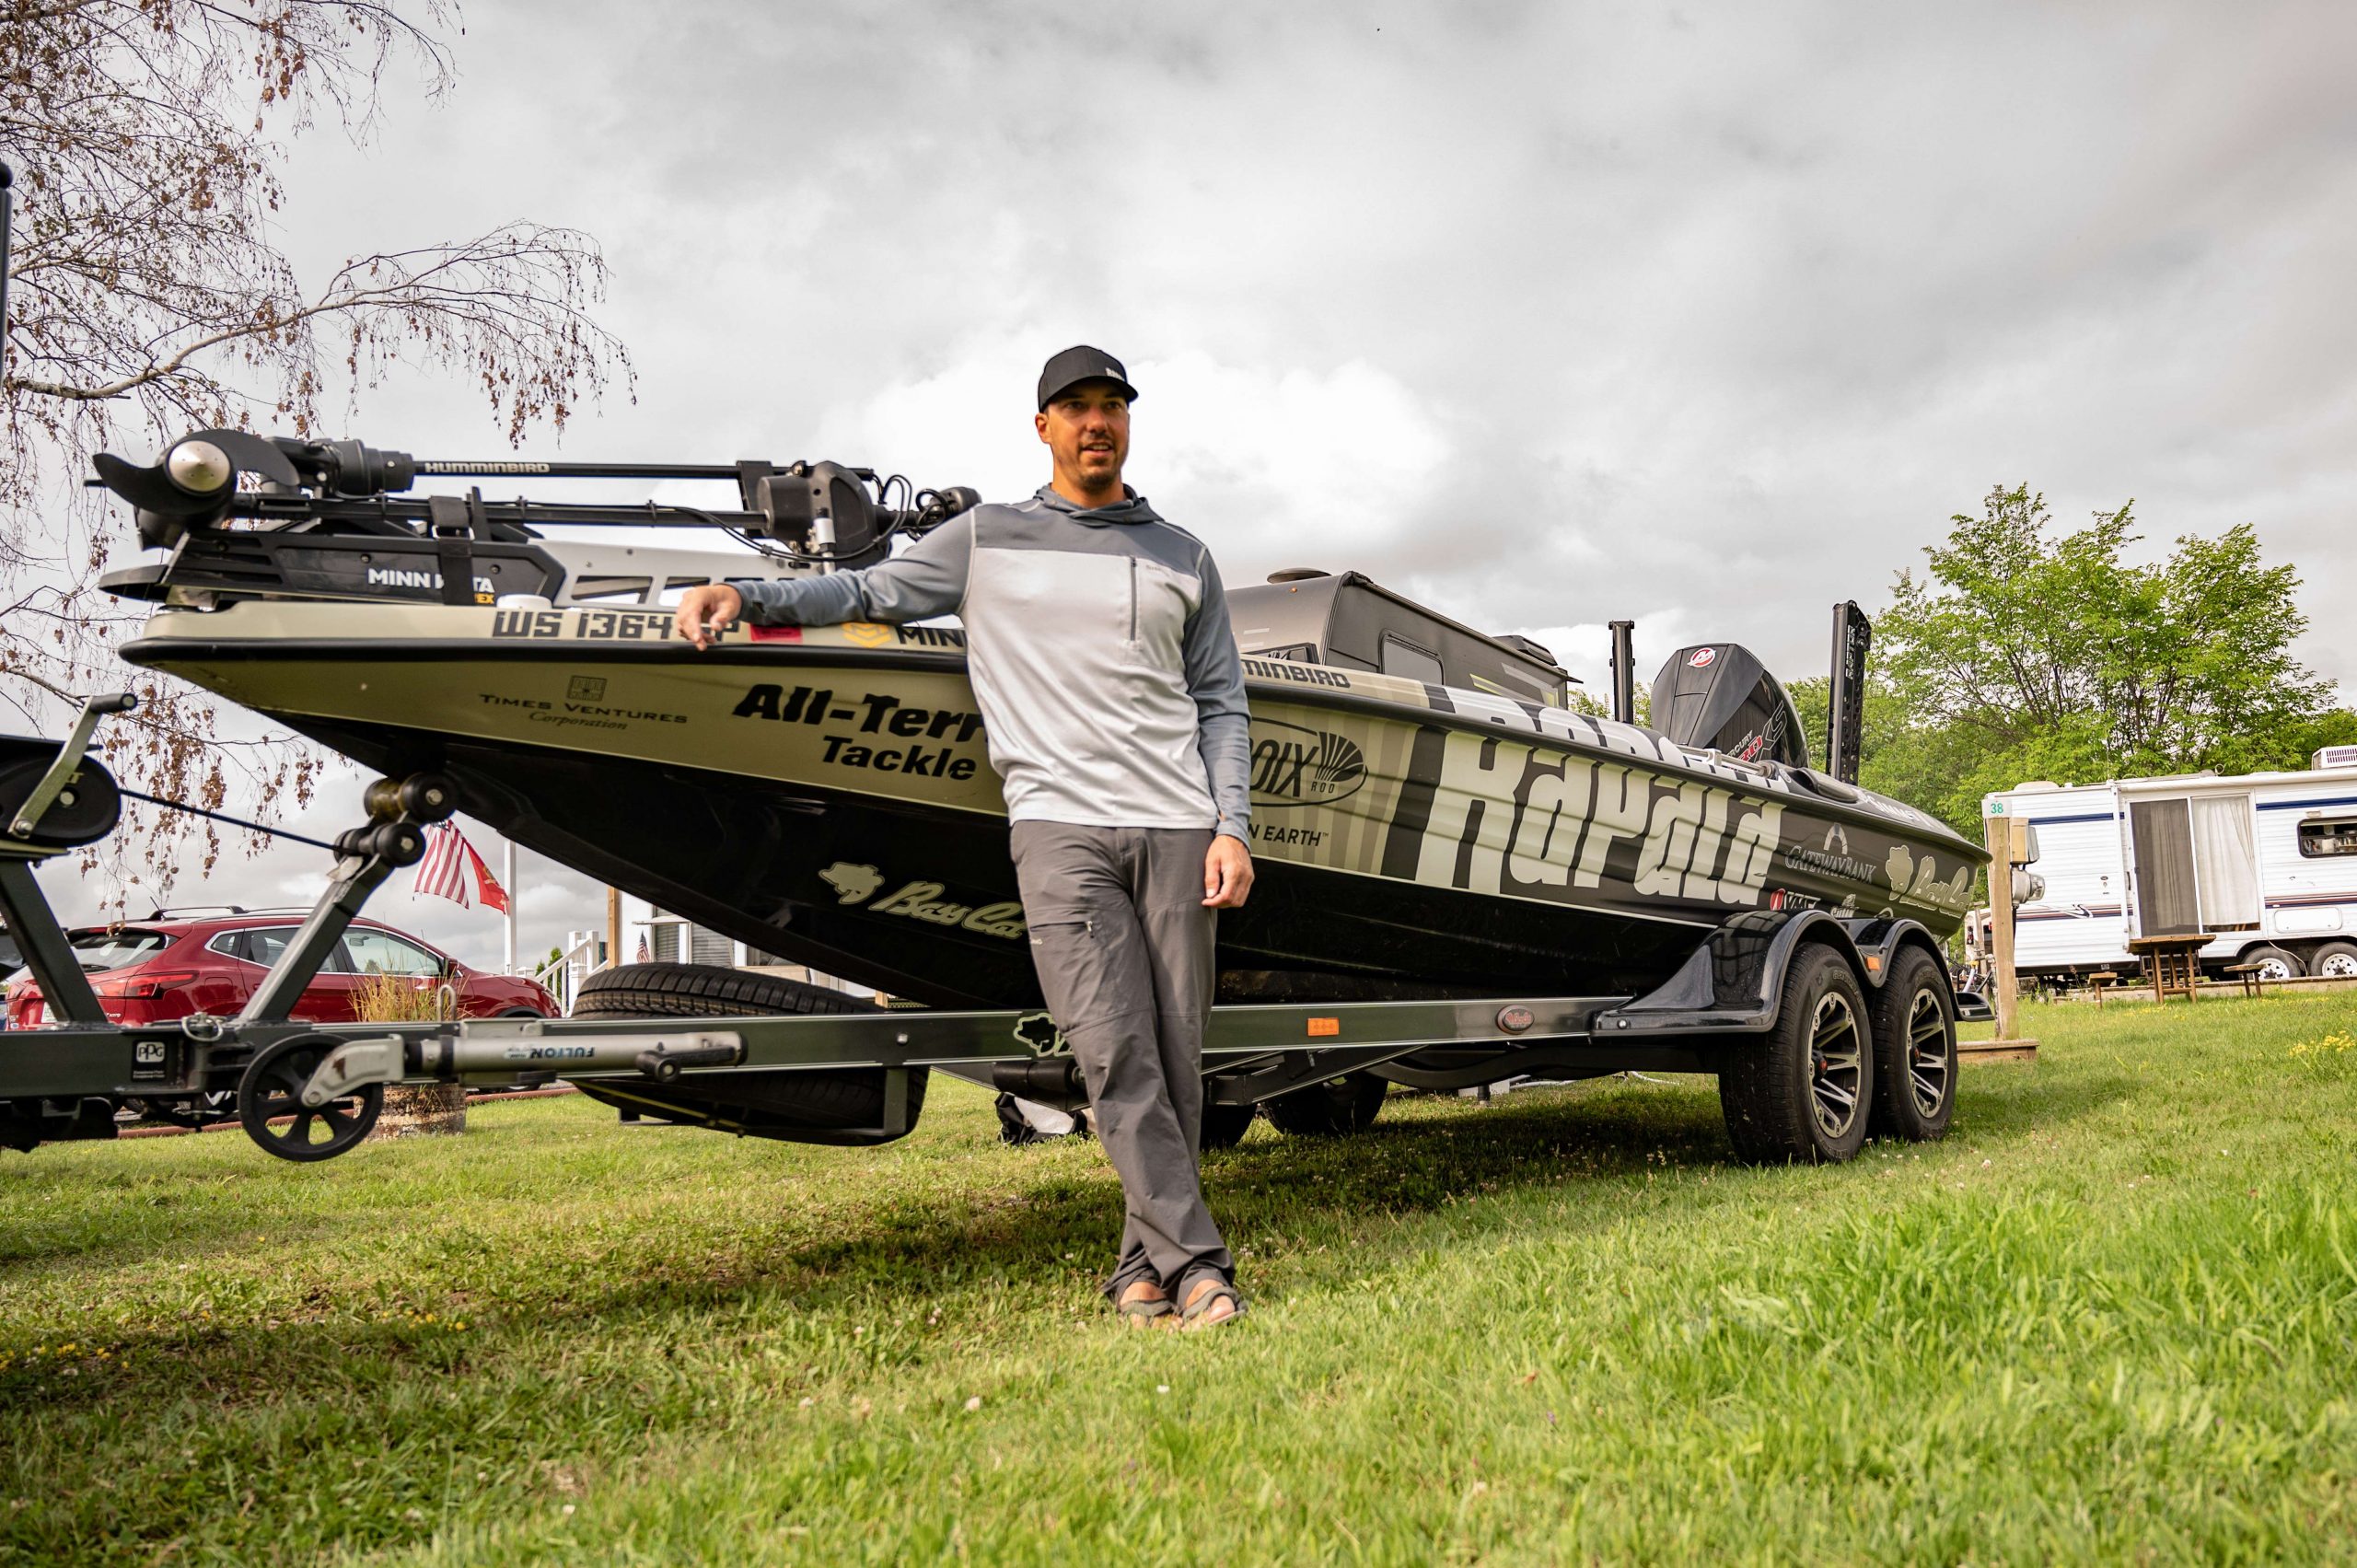 His boat and camper setup is ready for the week of fishing ahead, and he was kind enough to give us a look around while he dug out his setups for this gallery.